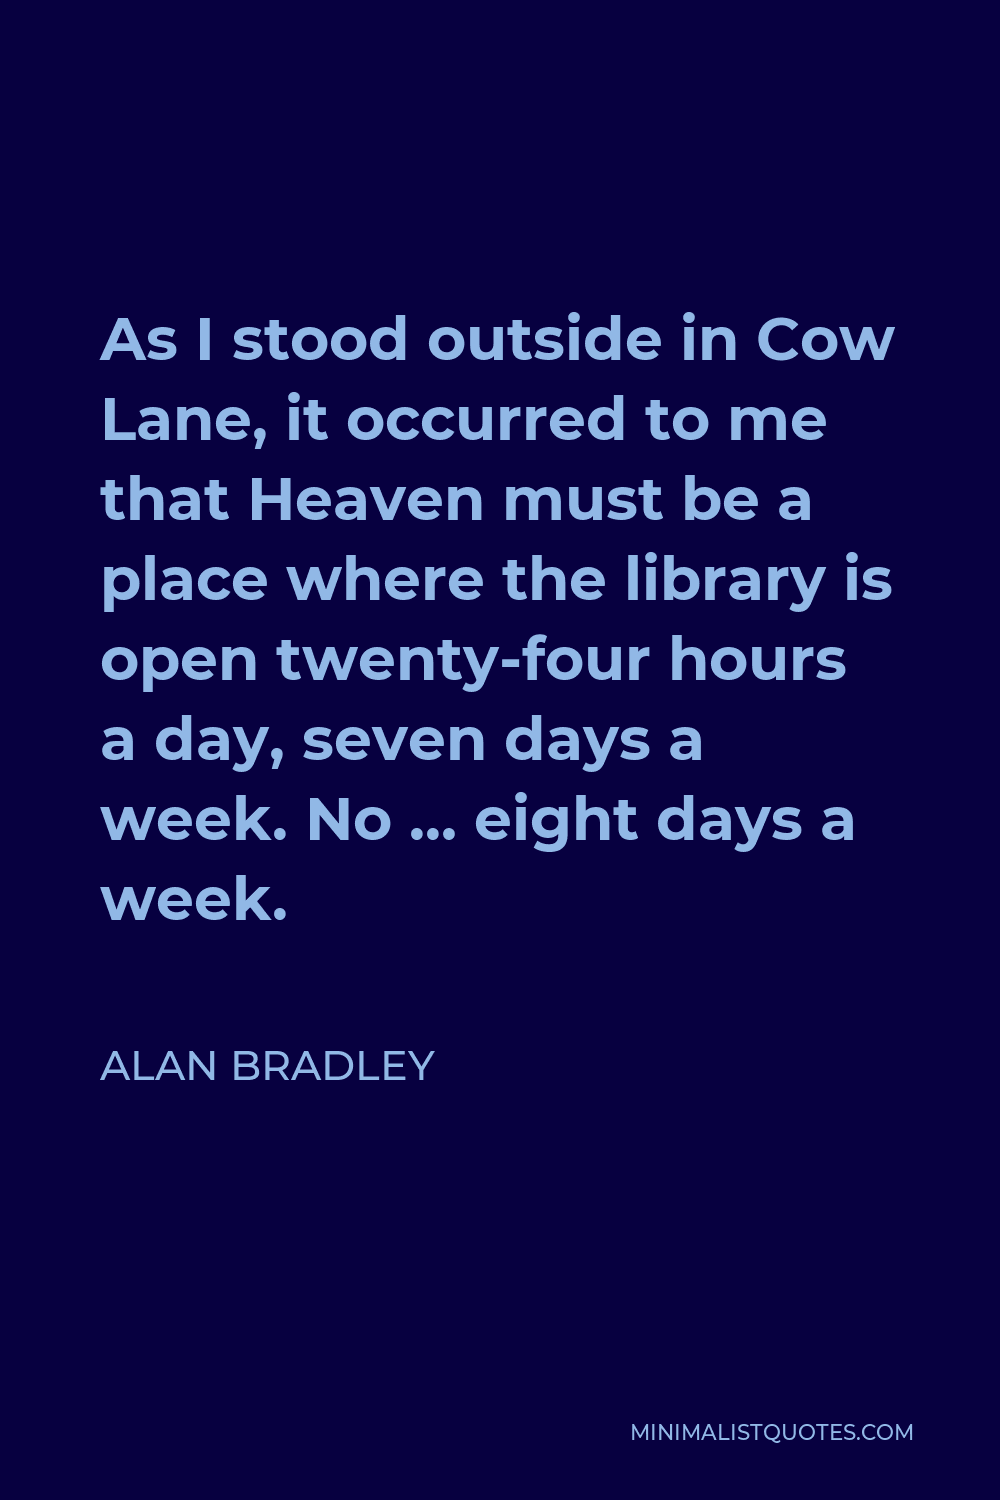 Alan Bradley Quote - As I stood outside in Cow Lane, it occurred to me that Heaven must be a place where the library is open twenty-four hours a day, seven days a week. No … eight days a week.